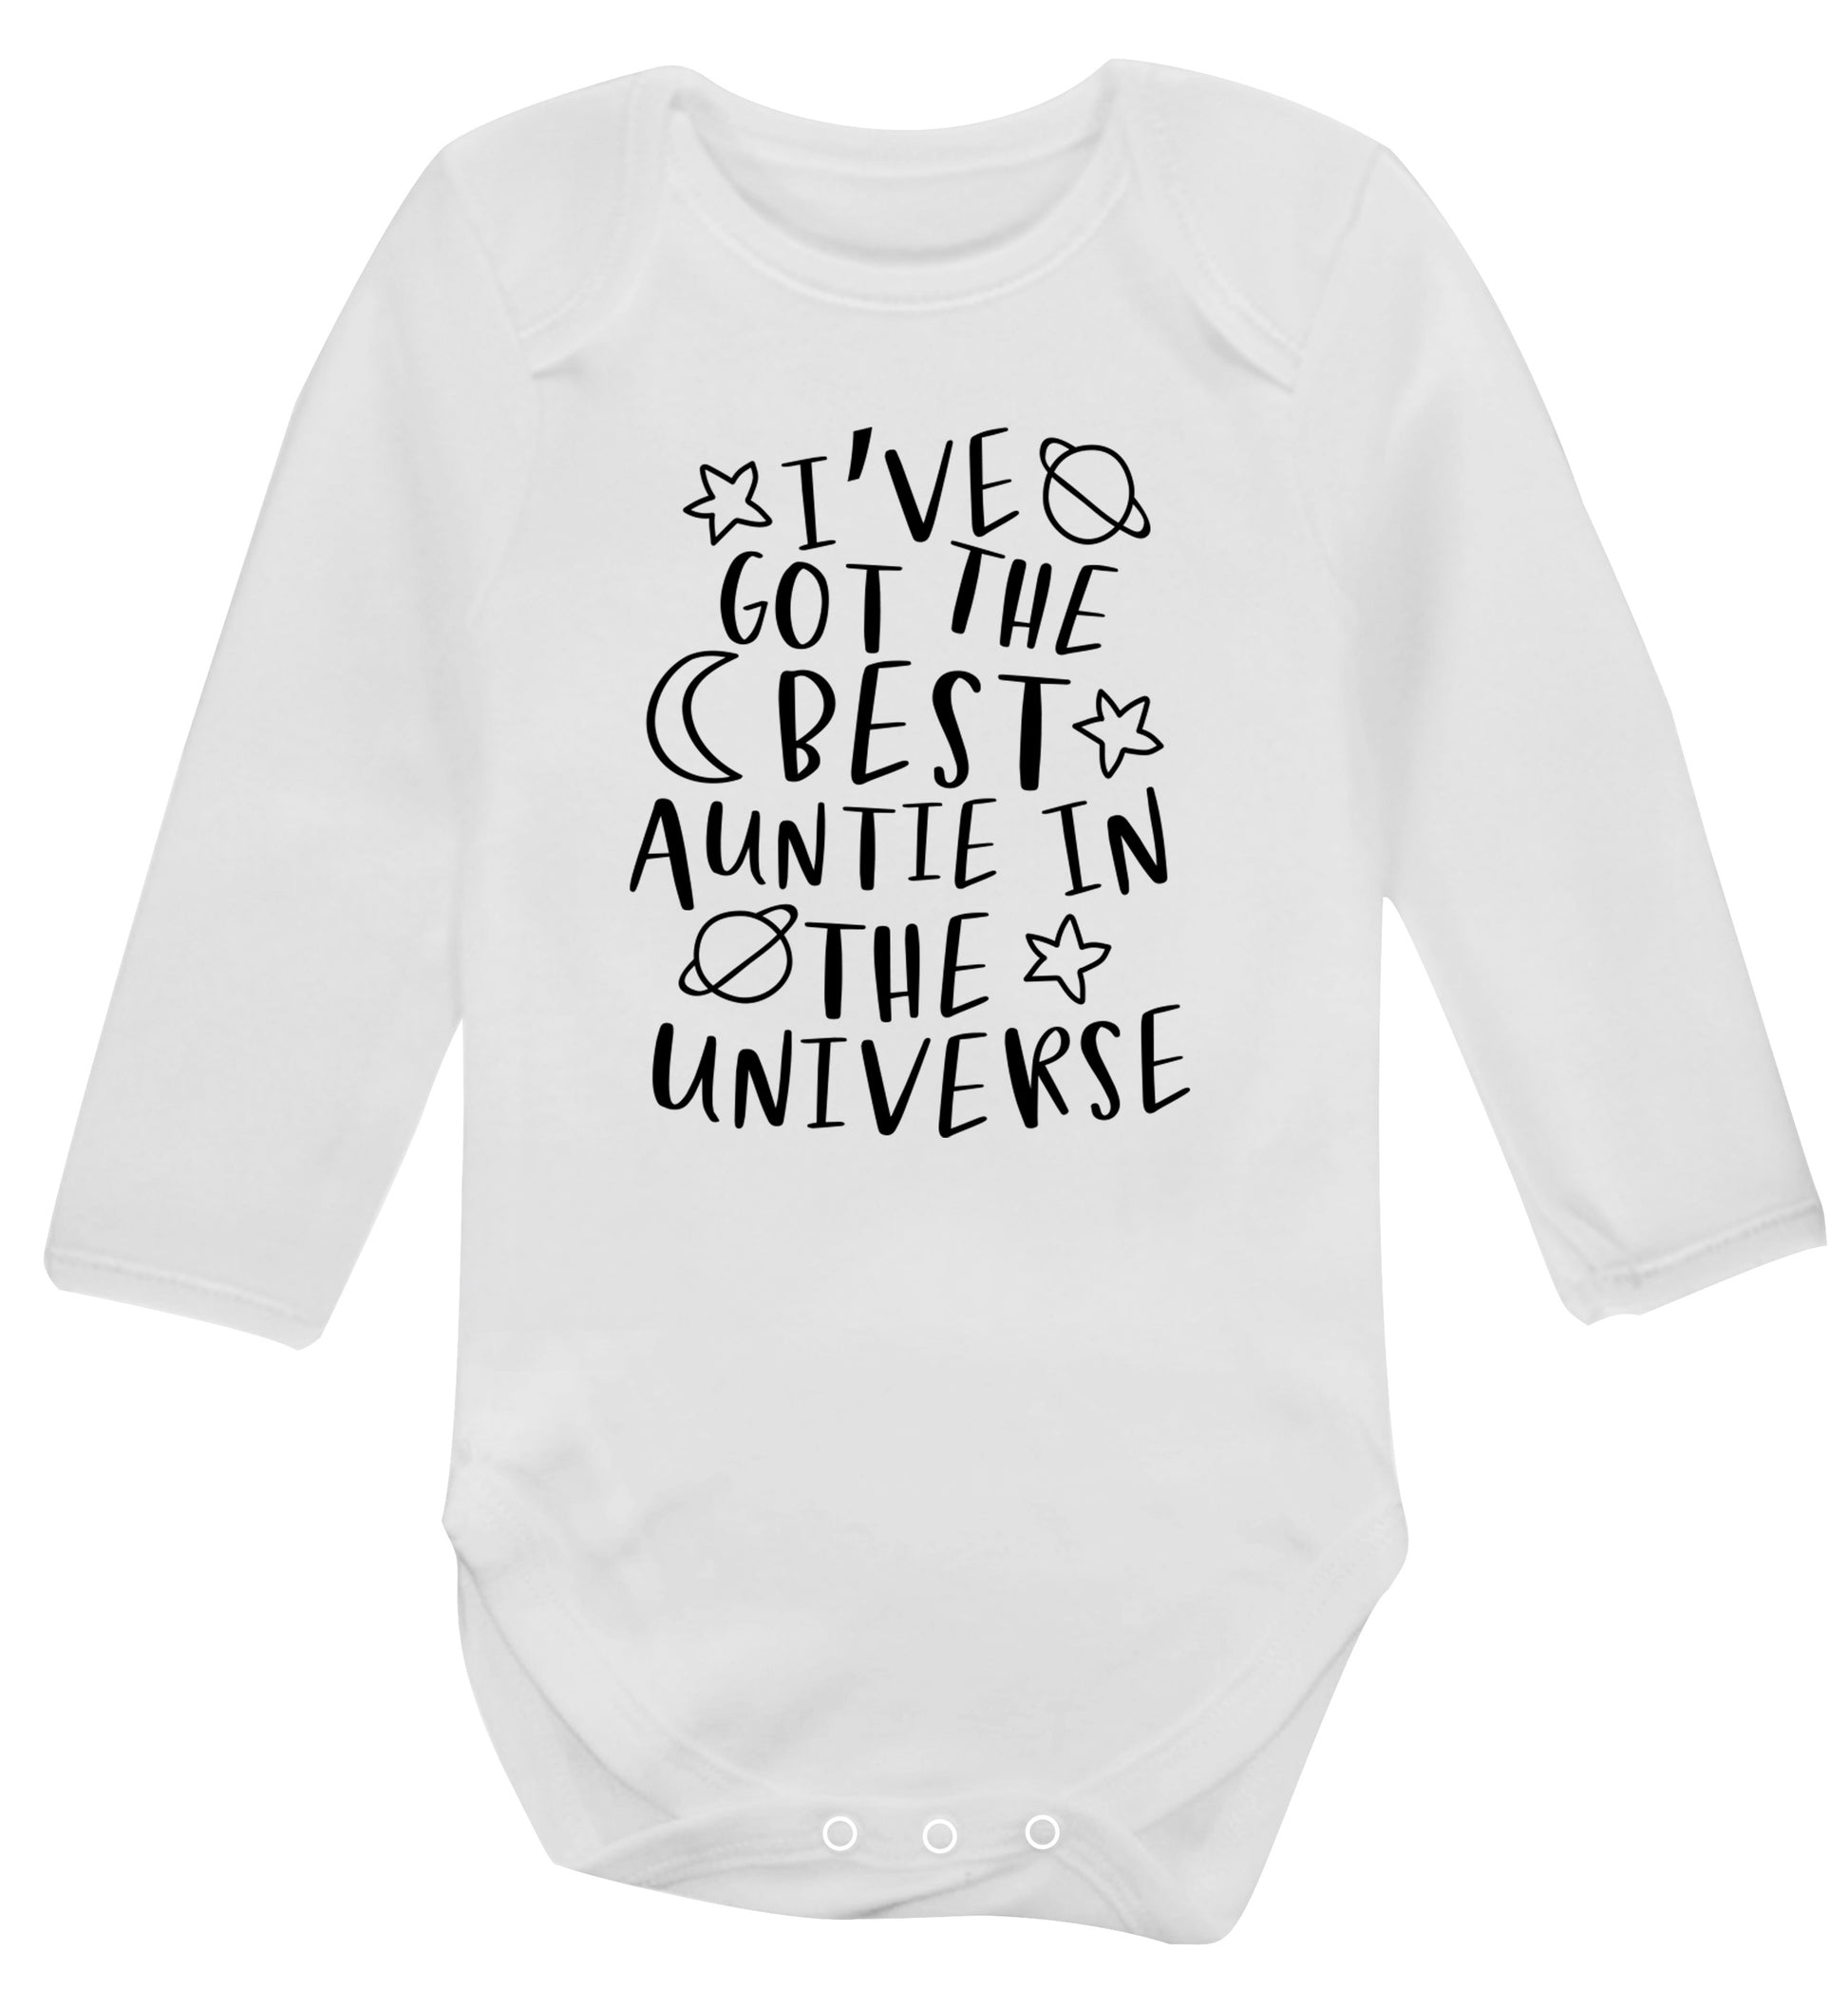 I've got the best auntie in the universe Baby Vest long sleeved white 6-12 months